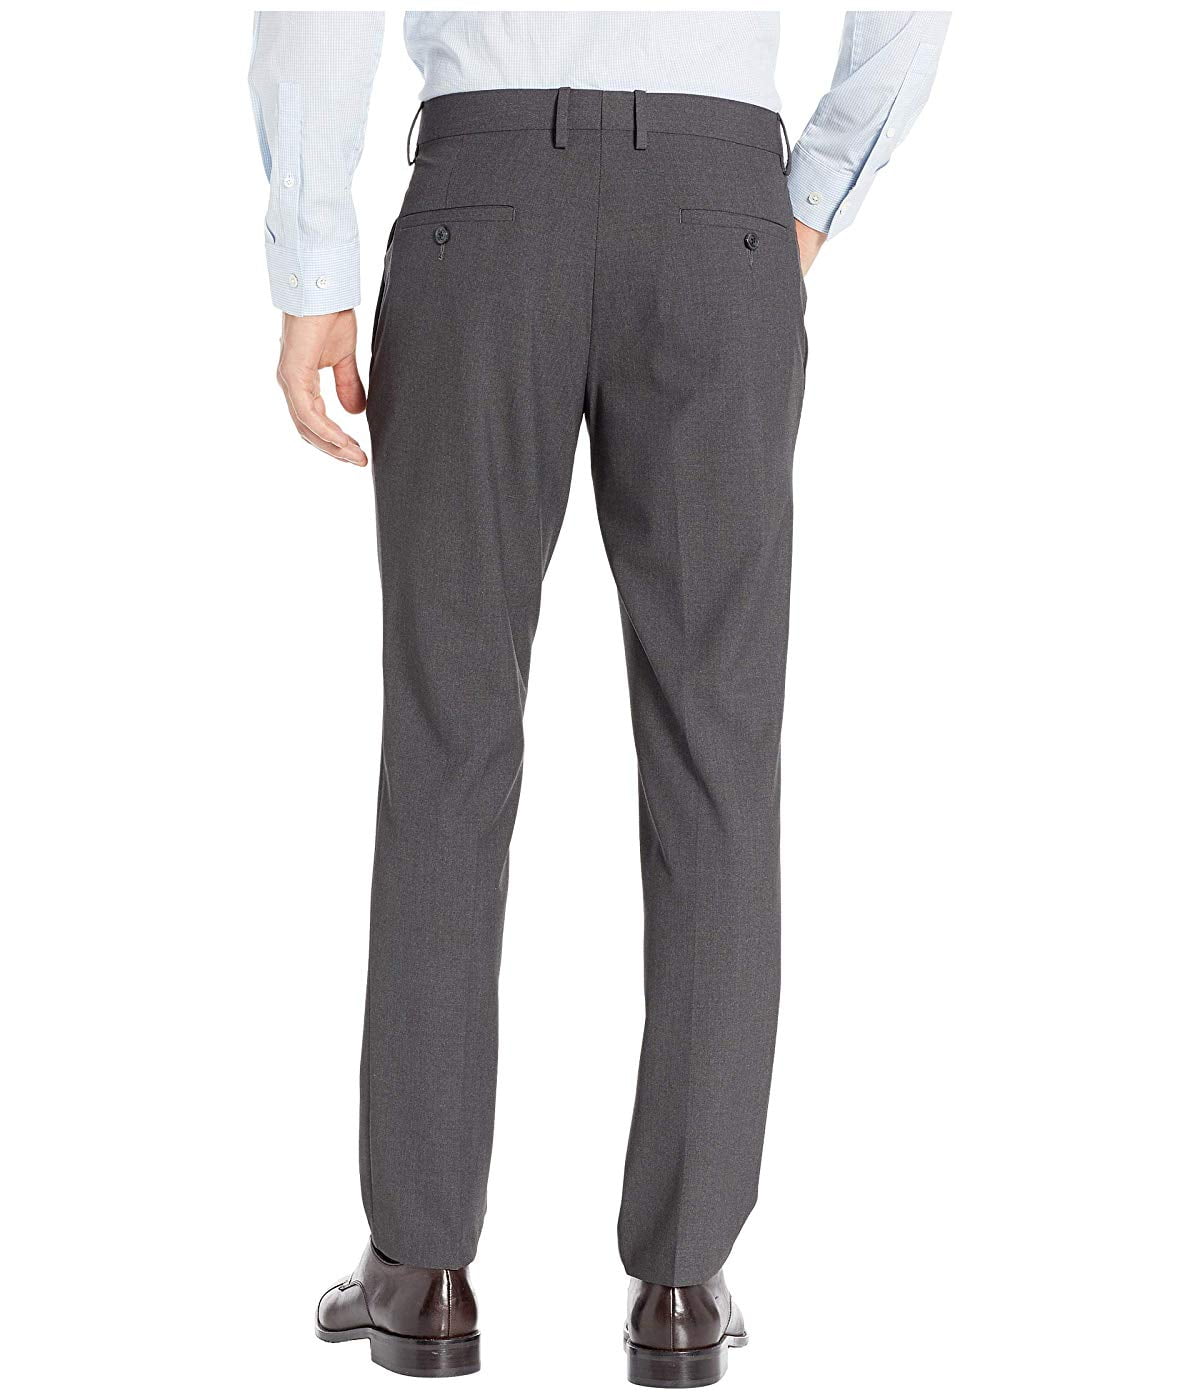 Kenneth Cole REACTION Men's 4-Way Stretch Solid Gab Slim Fit Dress Pant 